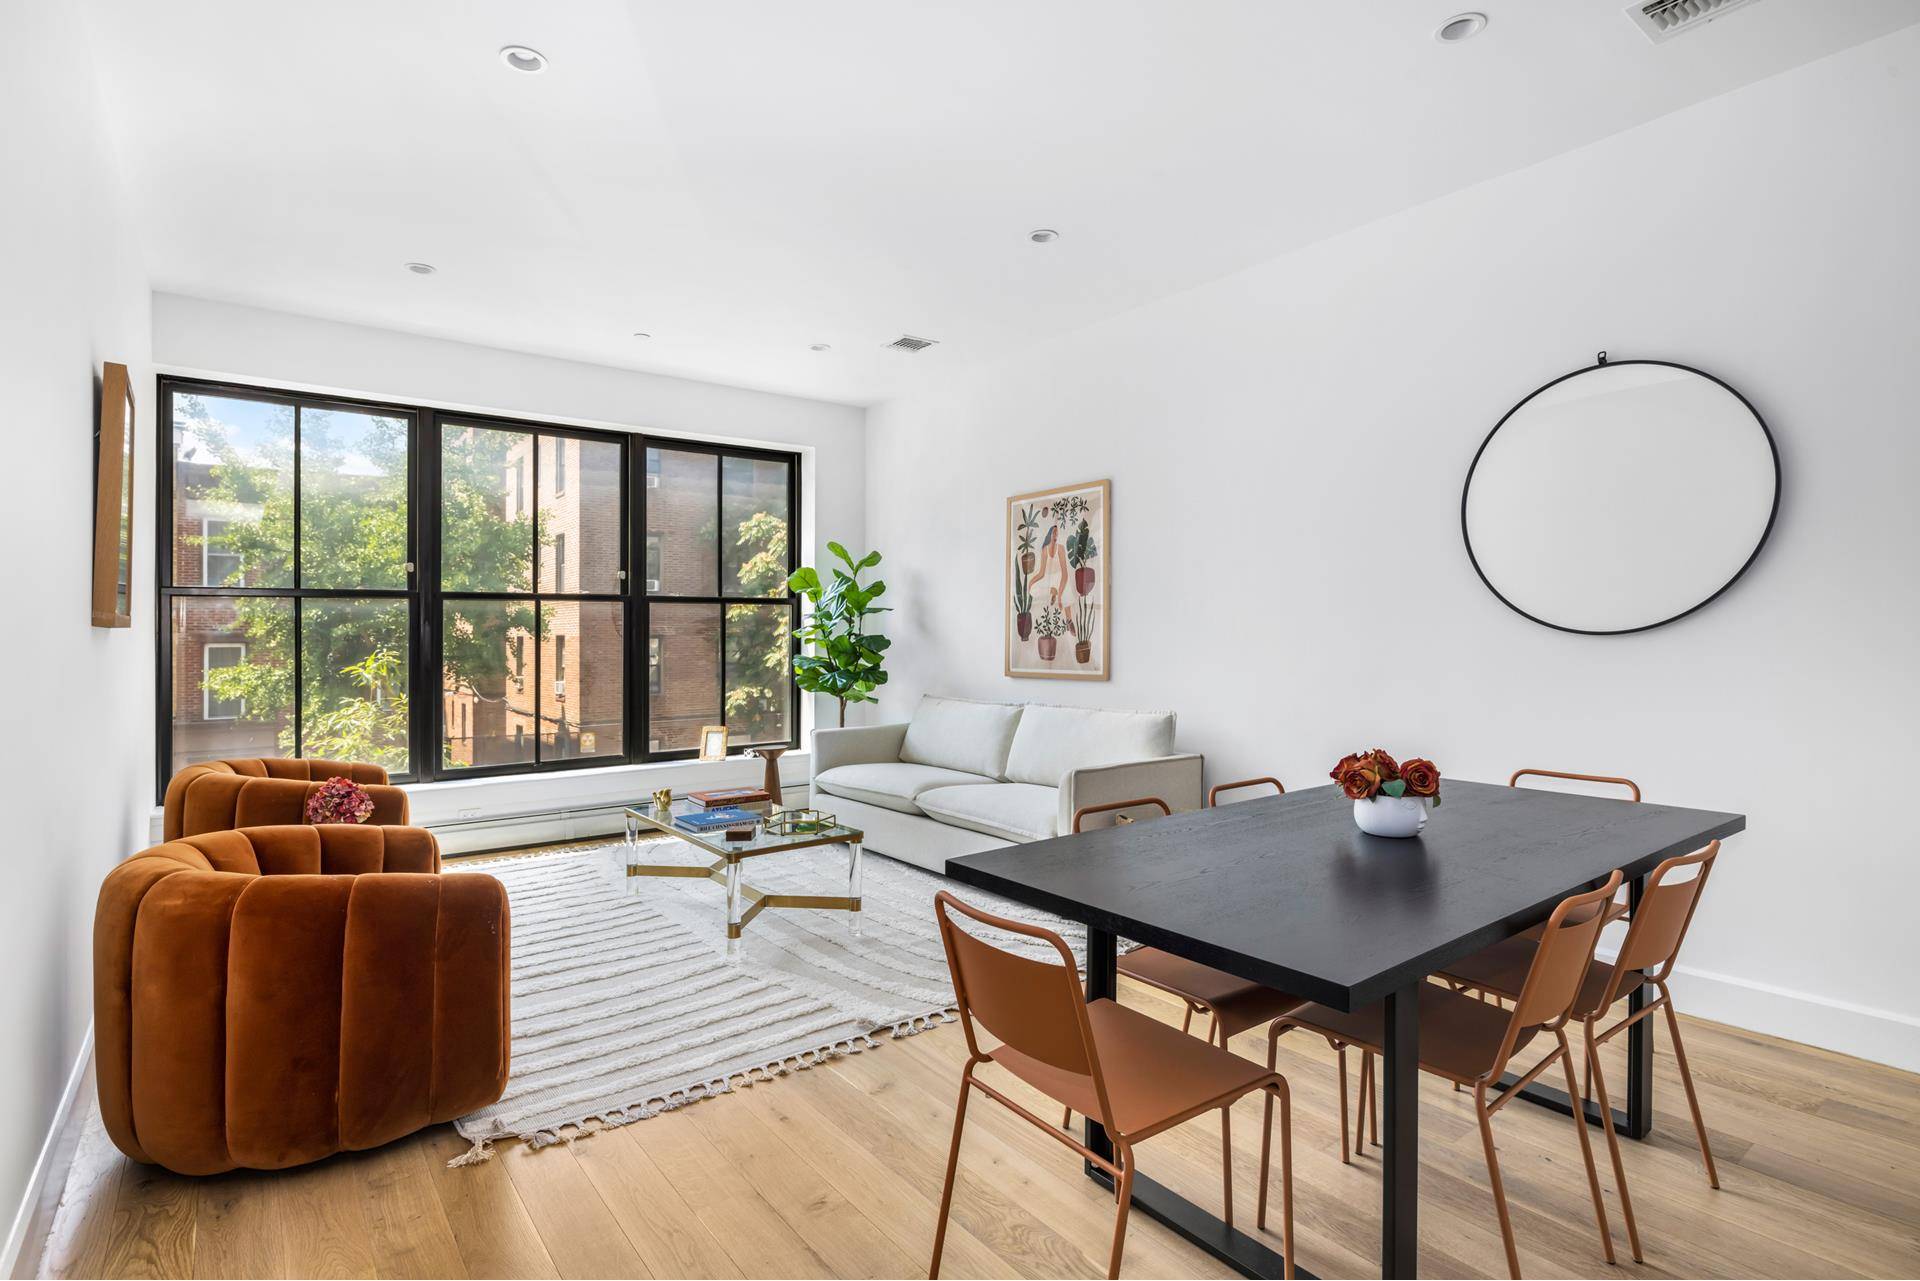 CONTRACT FELL THROUGH BACK ON THE MARKETWelcome to 197 23rd Street, Residence 2, a luxurious haven of modern living situated on the border of South Slope and Greenwood Heights.